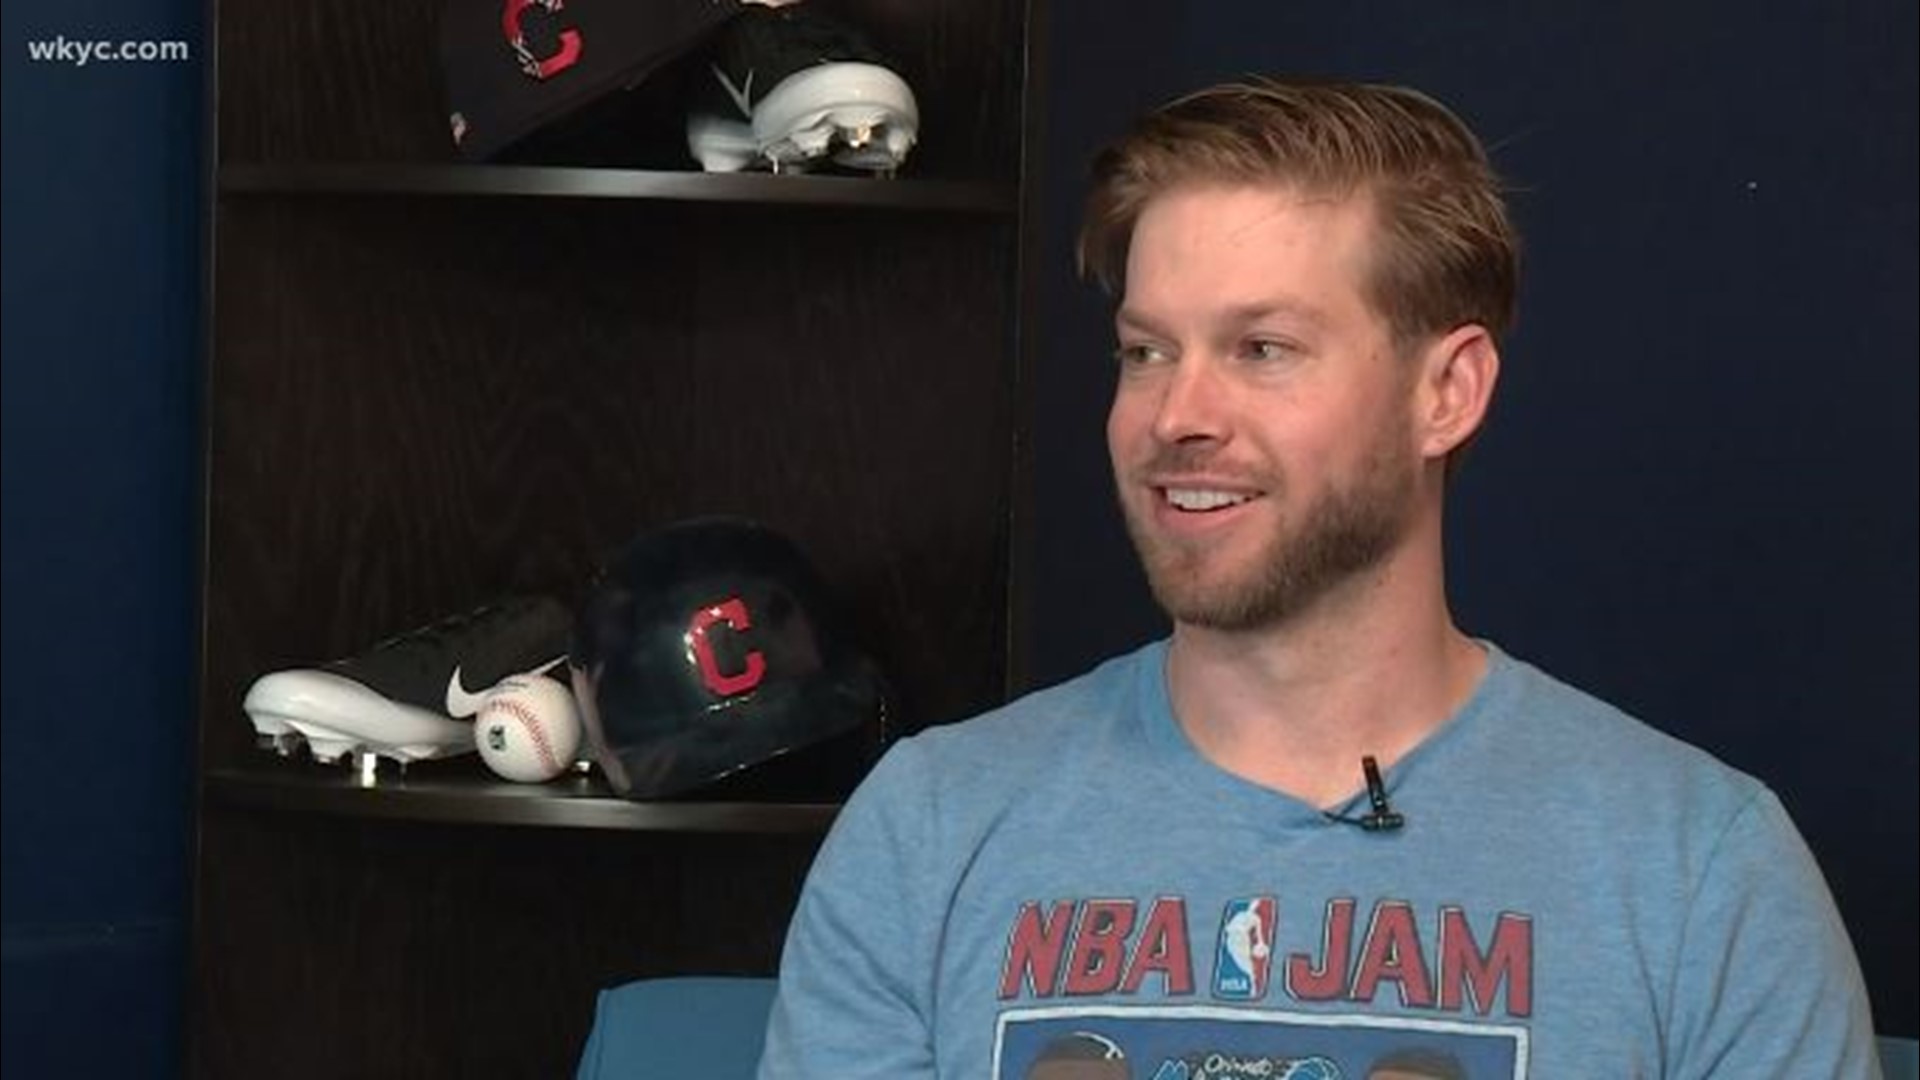 We sit down for an exclusive one-on-one interview with Cleveland Indians infielder Mike Freeman. He discusses family life, cartoons and his childhood nickname.